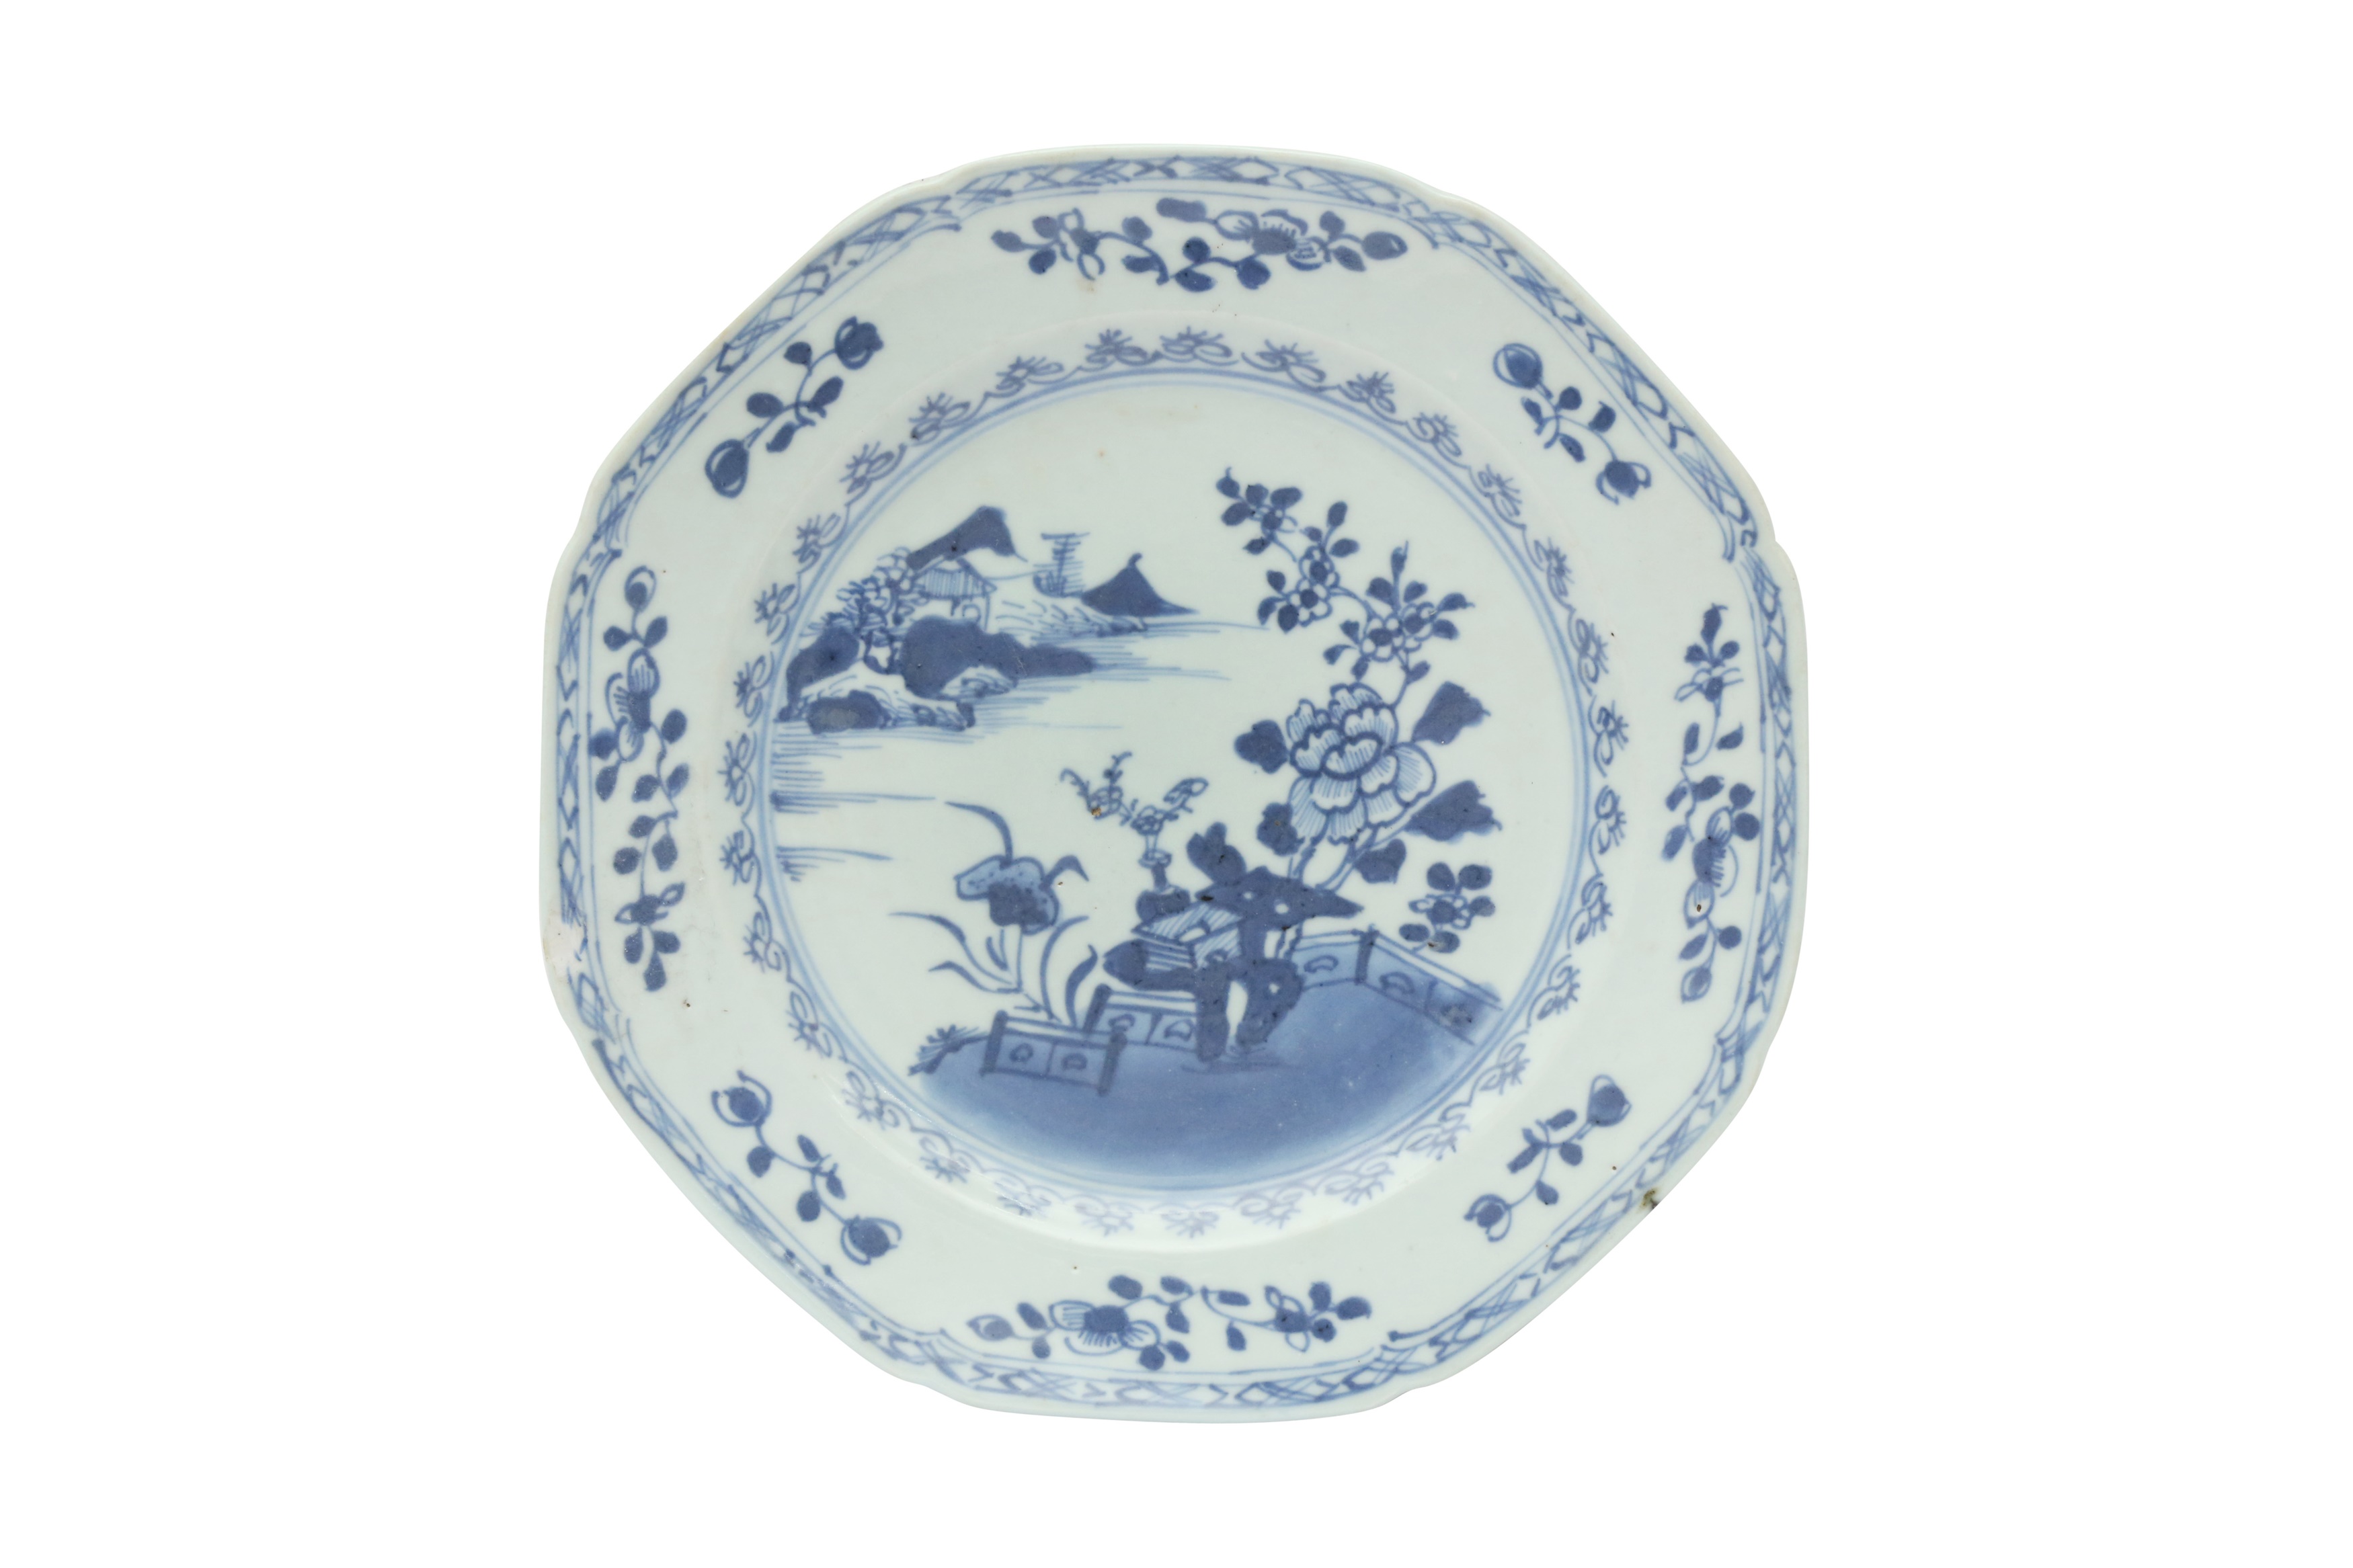 TWO CHINESE EXPORT BLUE AND WHITE DISHES 清十八世紀 外銷青花盤兩件 - Image 3 of 12